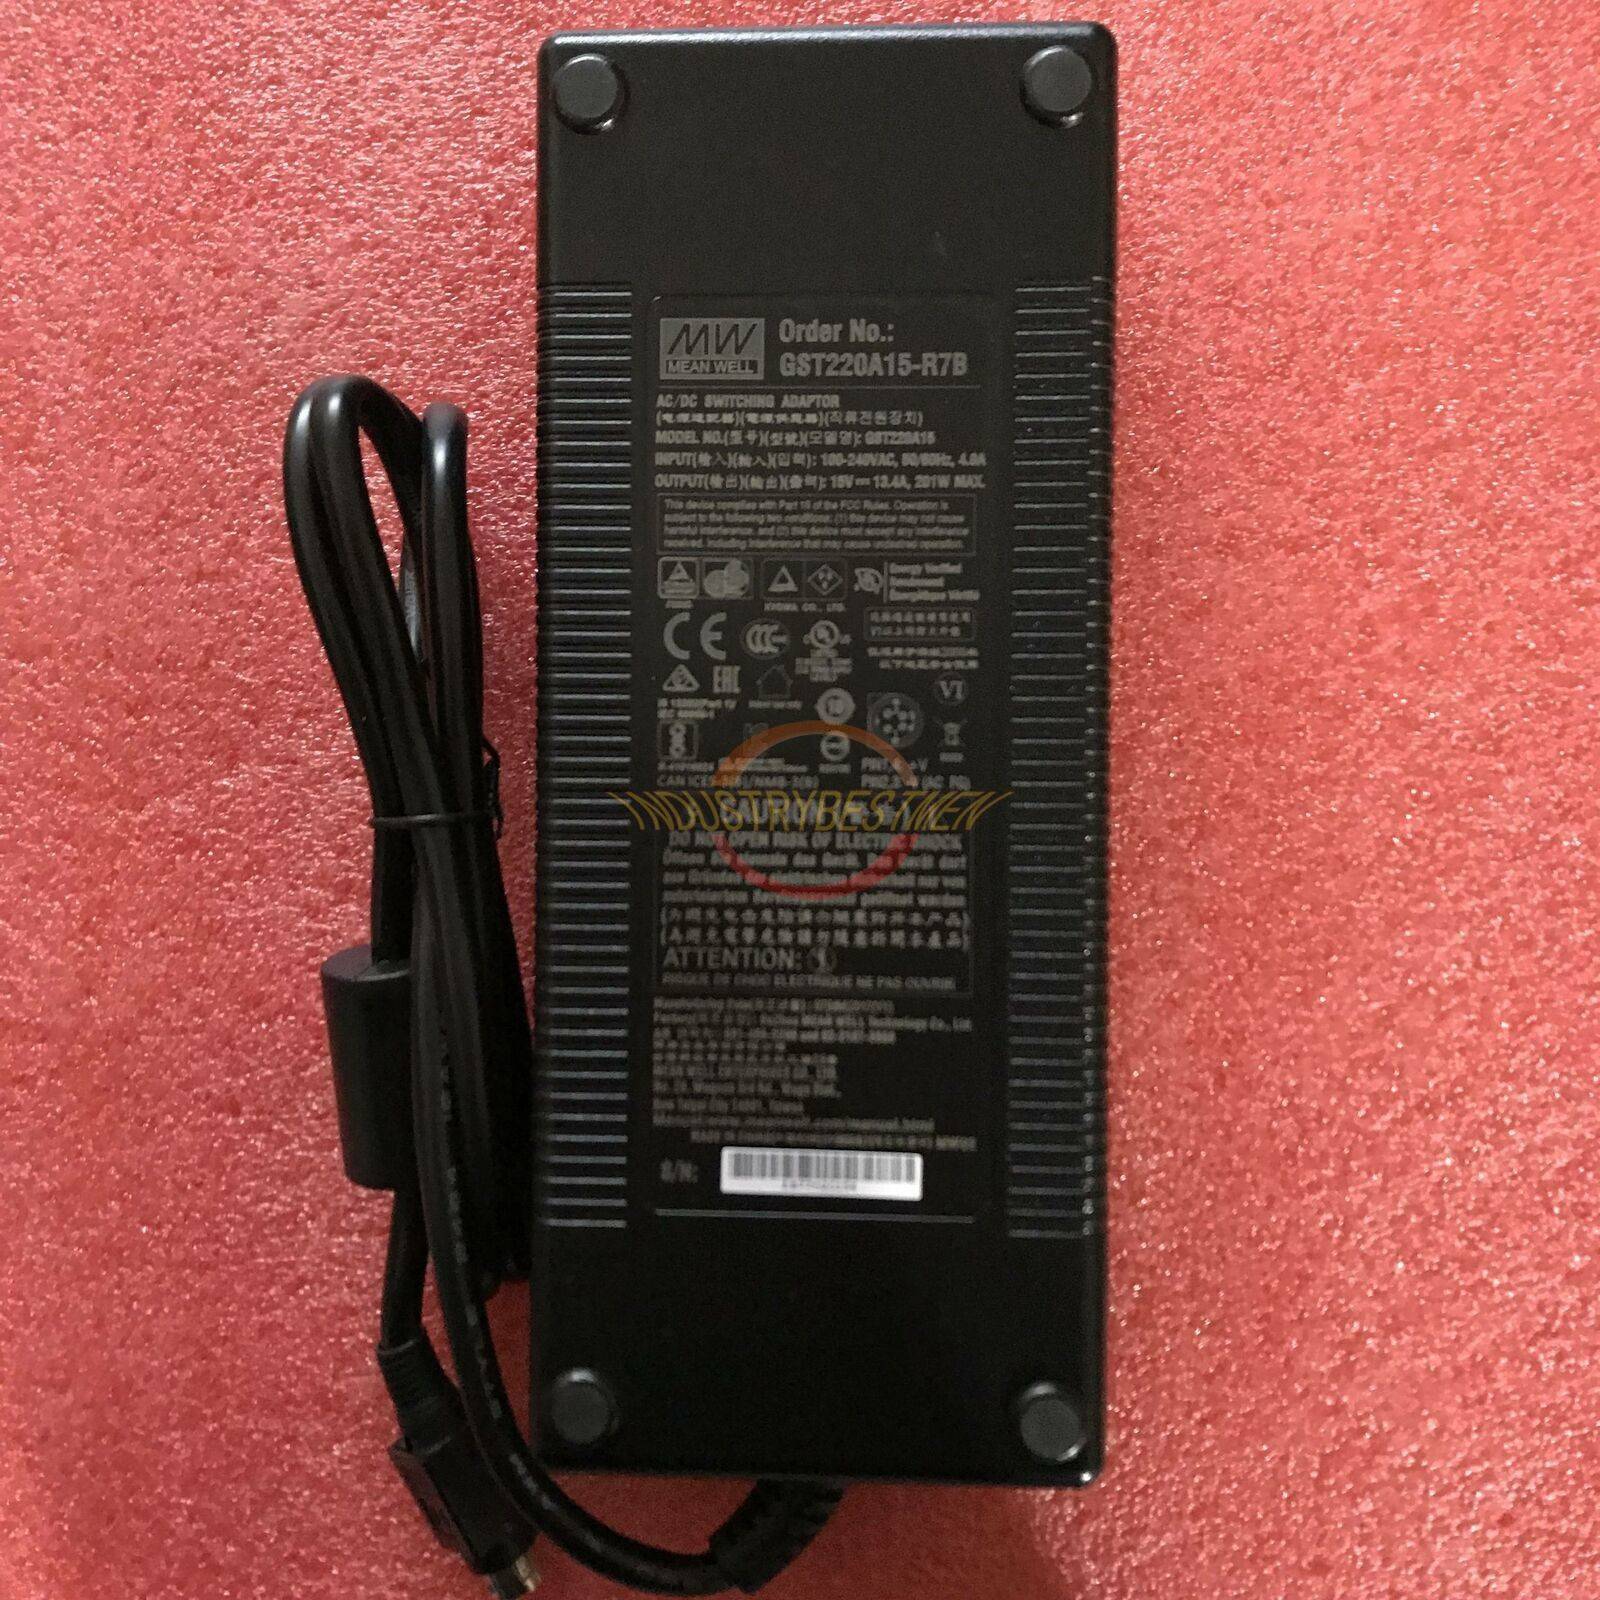 1PCS NEW Mean Well Power Supply GST220A24-R7B Model: GST220A24-R7B MPN: GST220A24-R7B Brand: Mean Well 1PCS NEW Mea